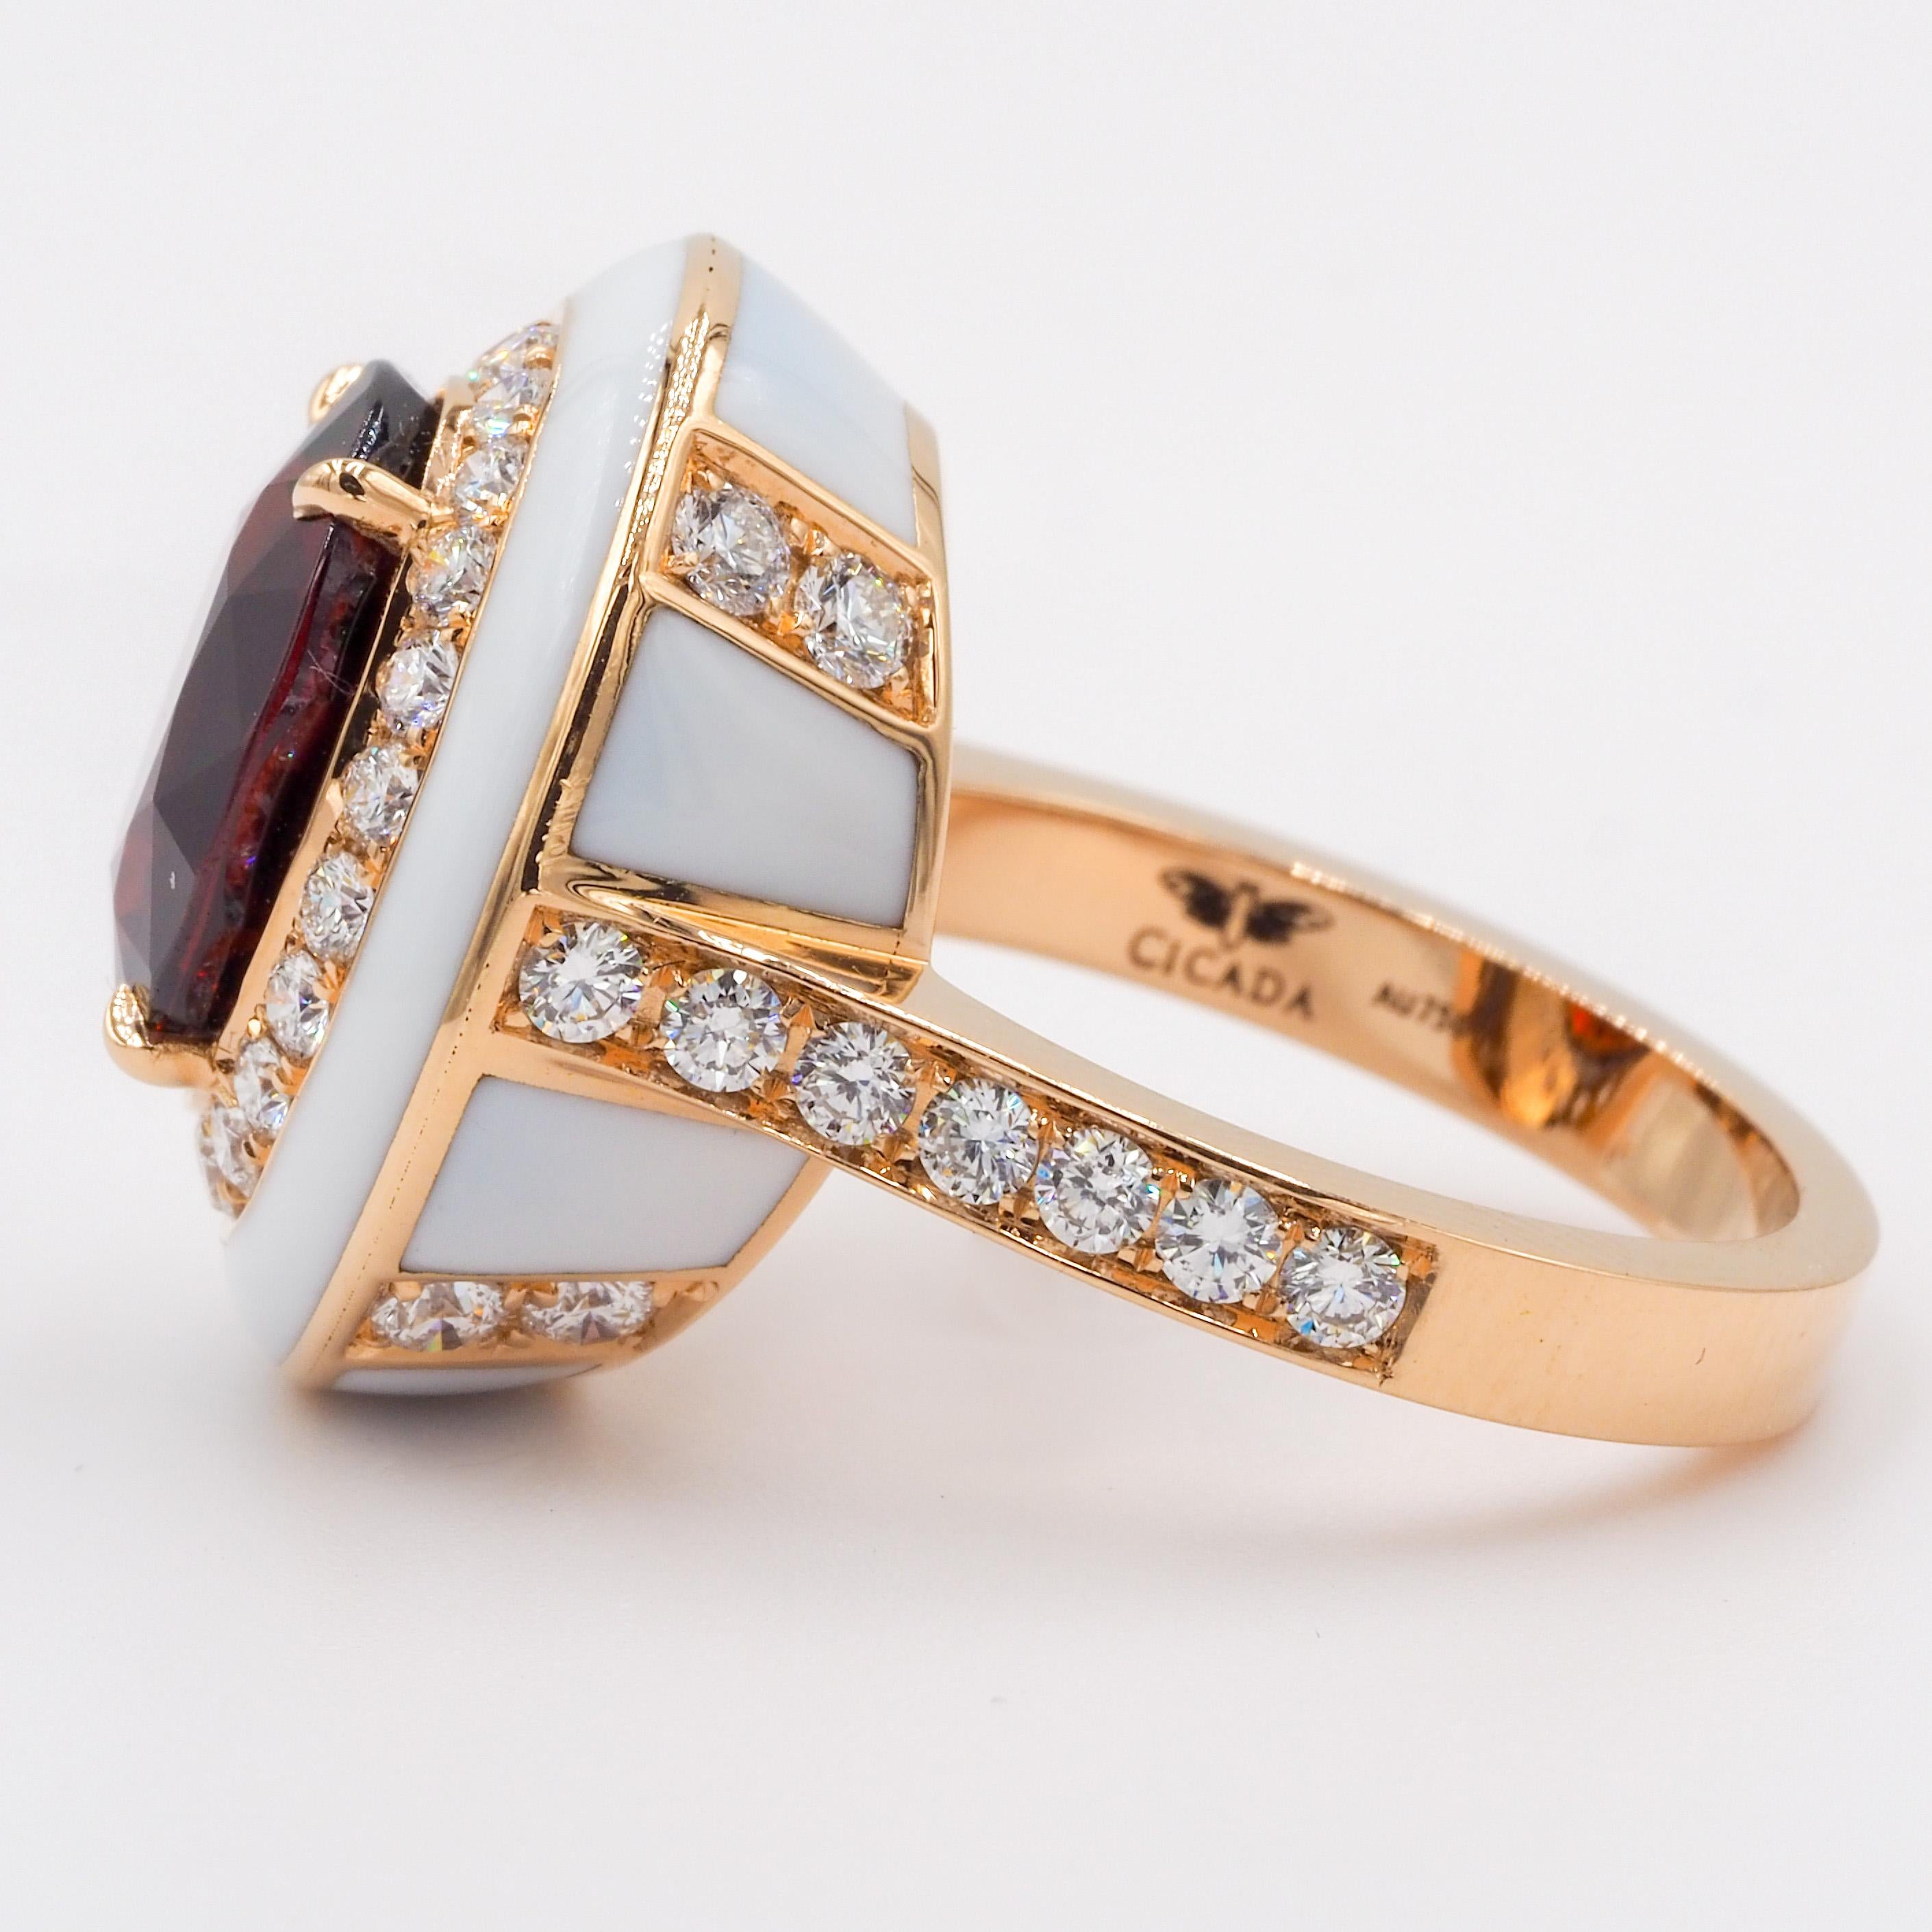 This 18k rose gold cocktail ring features an oval red garnet center, surrounded by diamonds. The off-white enamel ceramic enhances the color of the beautiful center stone.

Red Garnet Center: 6.76ct
Diamonds: 1.12ct
Ring Size: 6 (can be